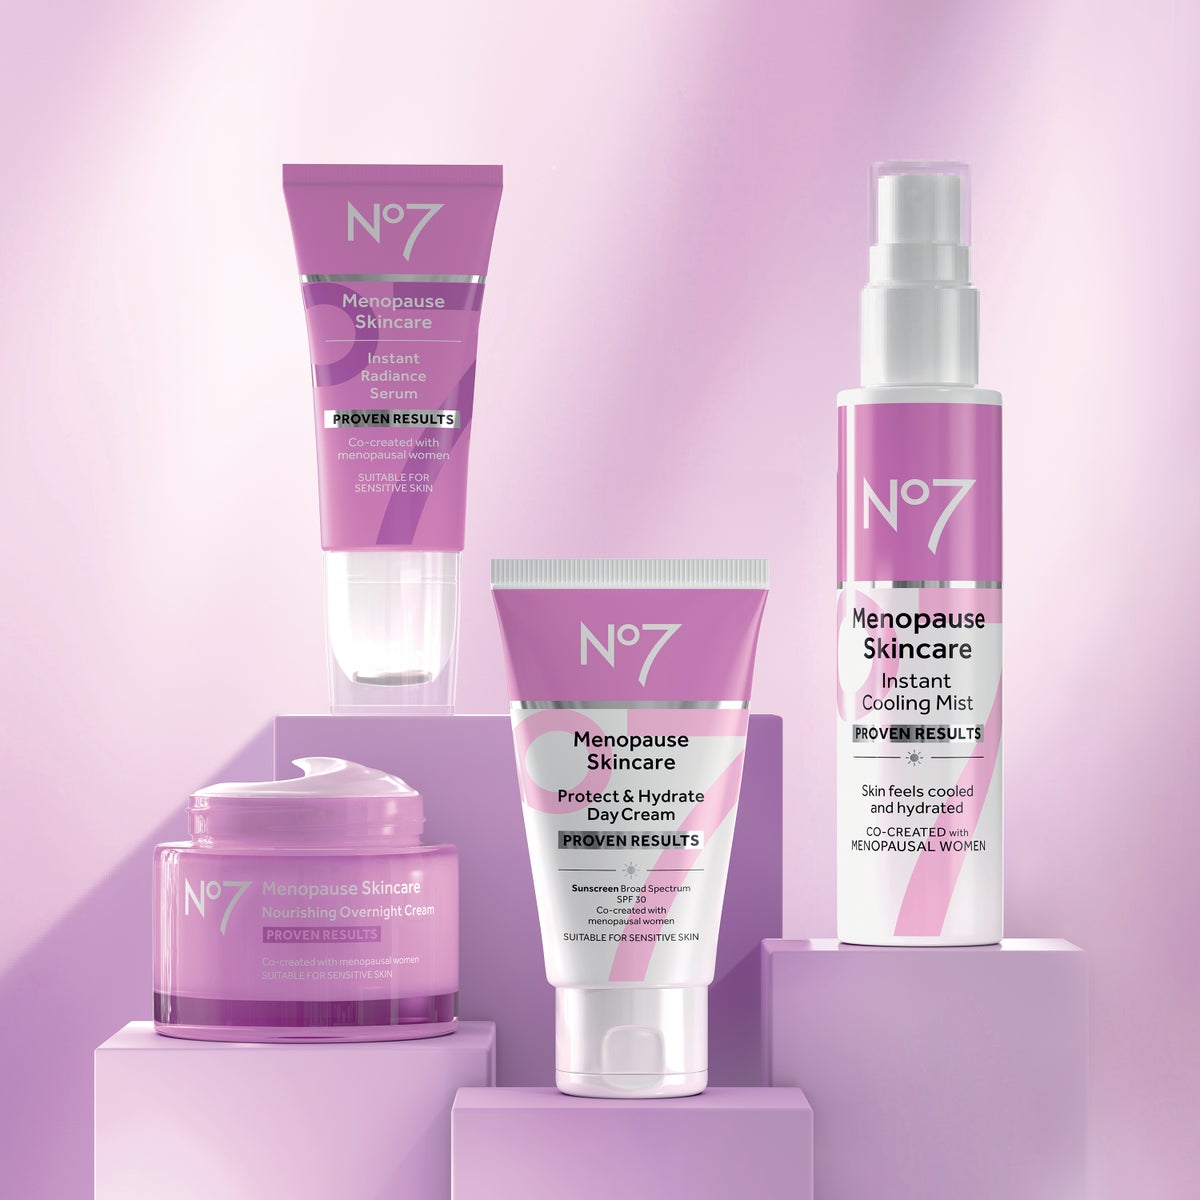 Free Face Mask When You Spend $60. Get a free face mask when you spend $60 on your No7 favorites!